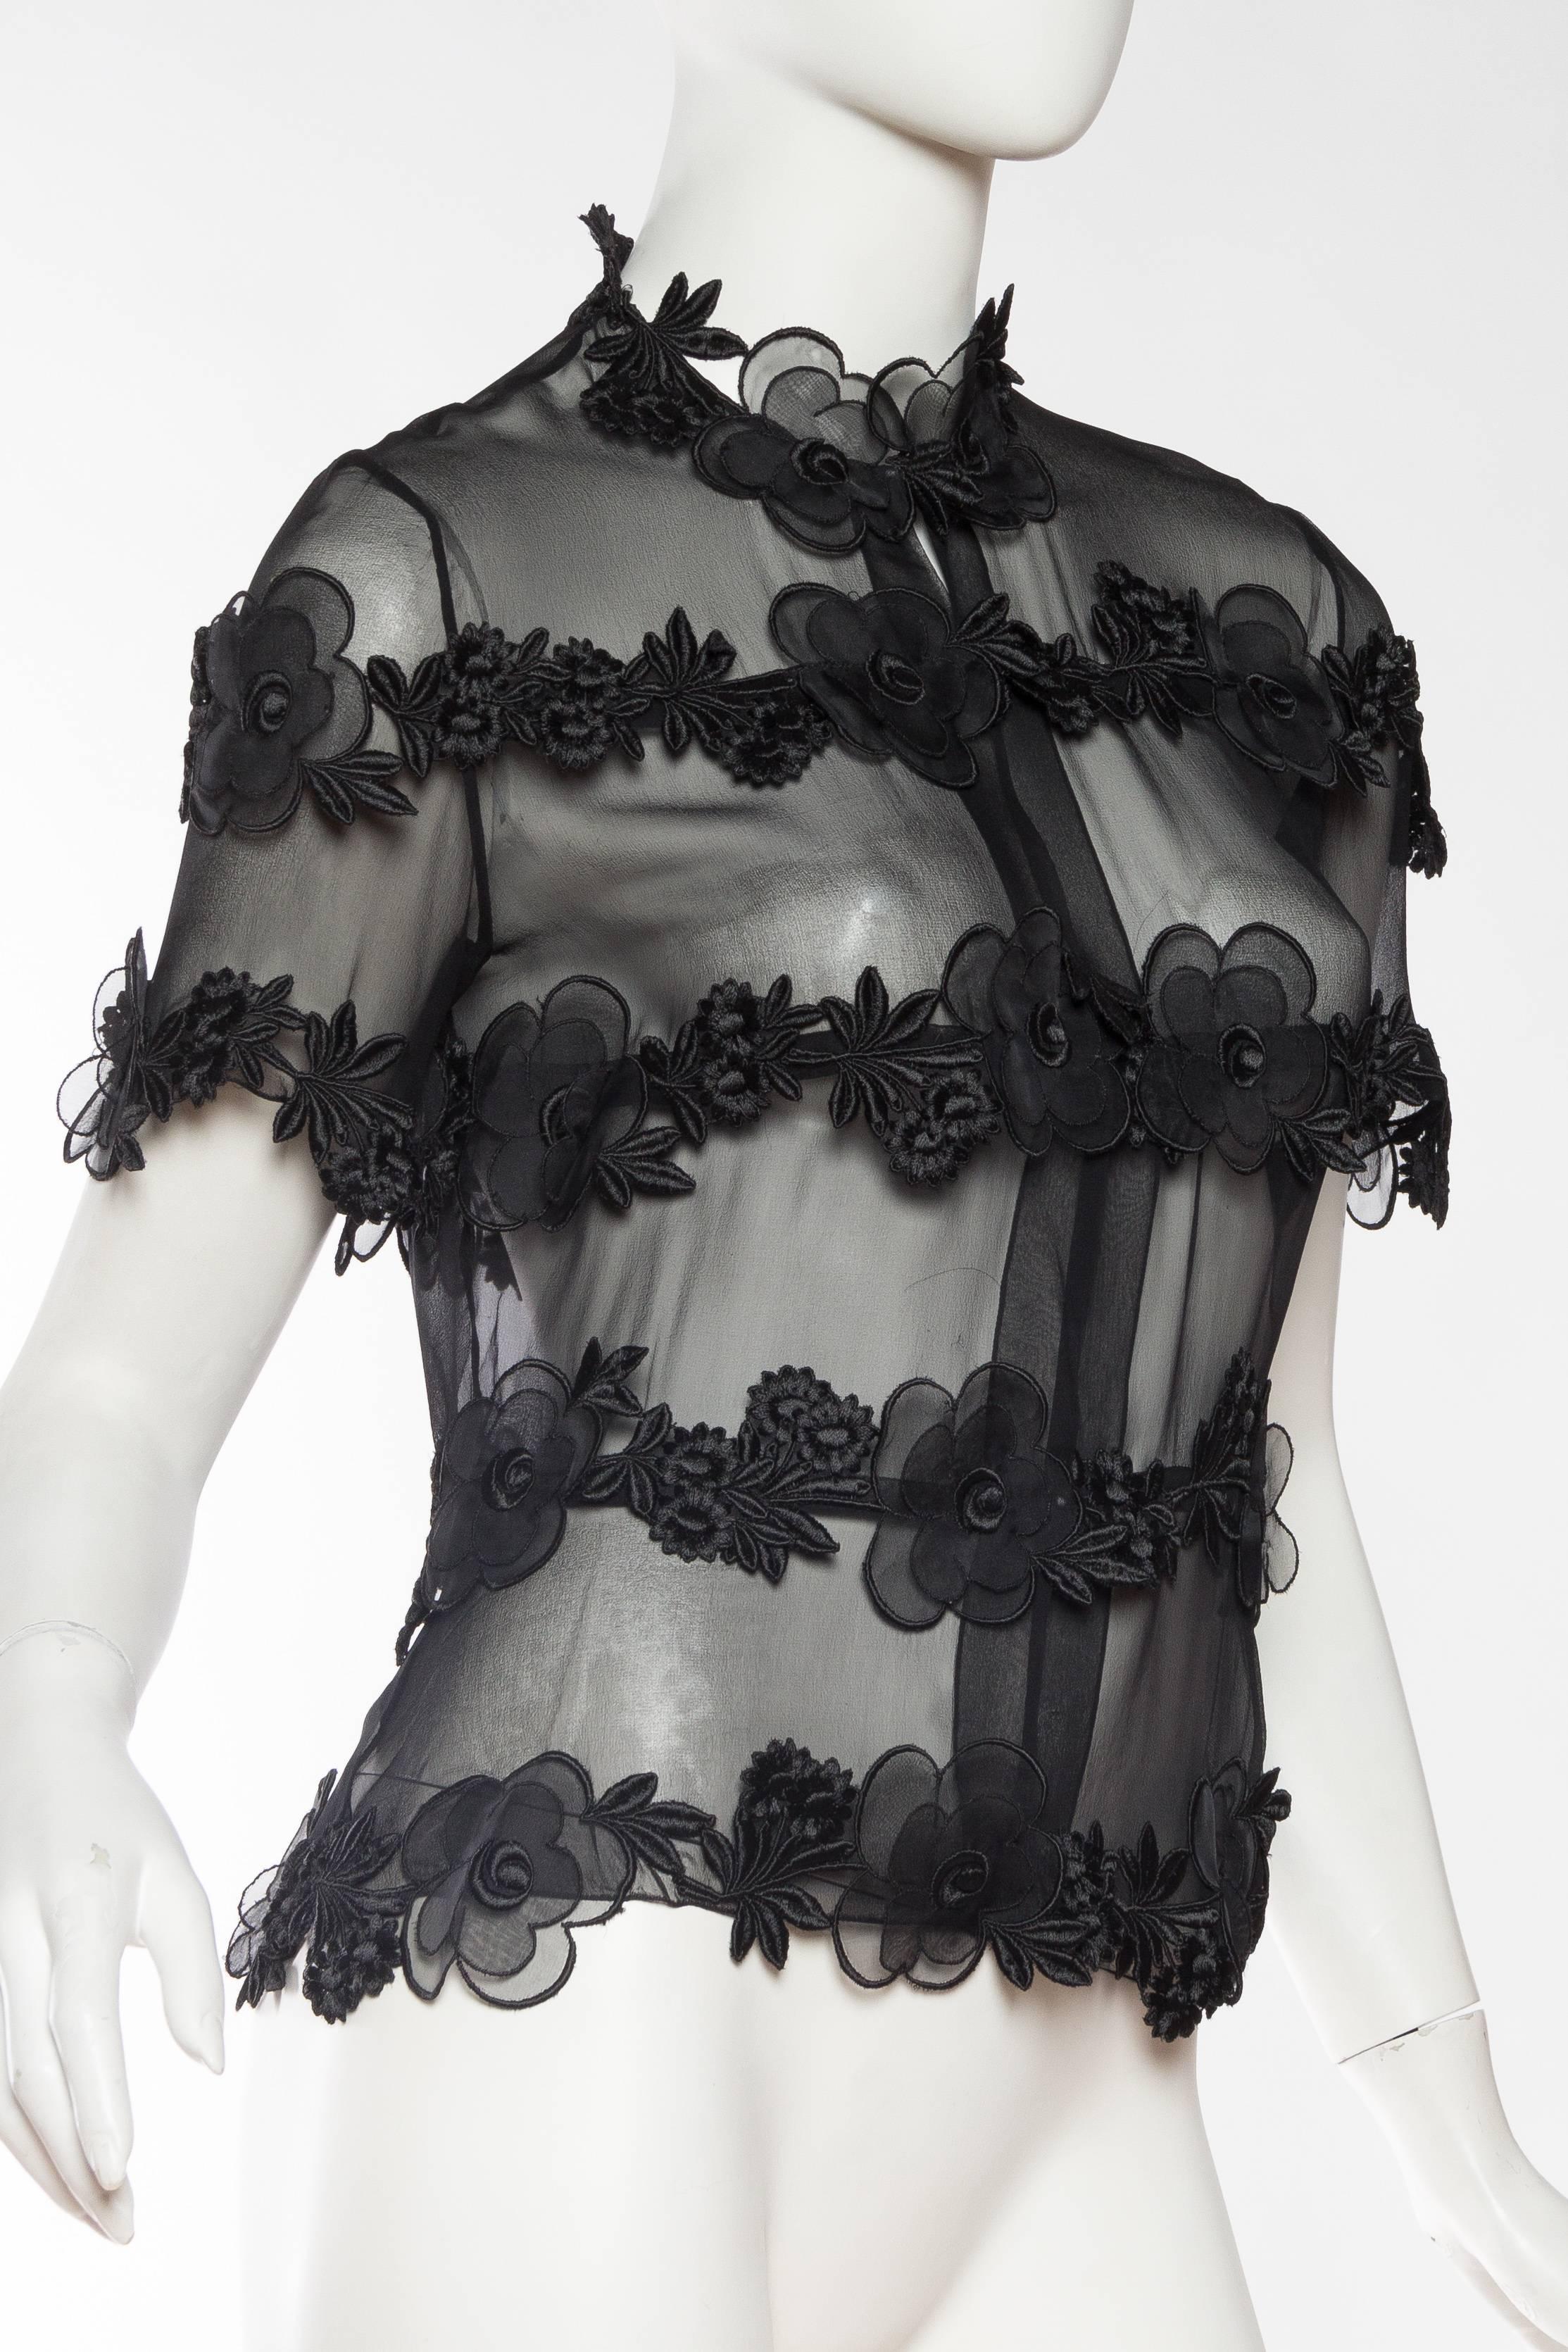 Women's Sheer Black Chanel Jacket with Embroidered Flowers